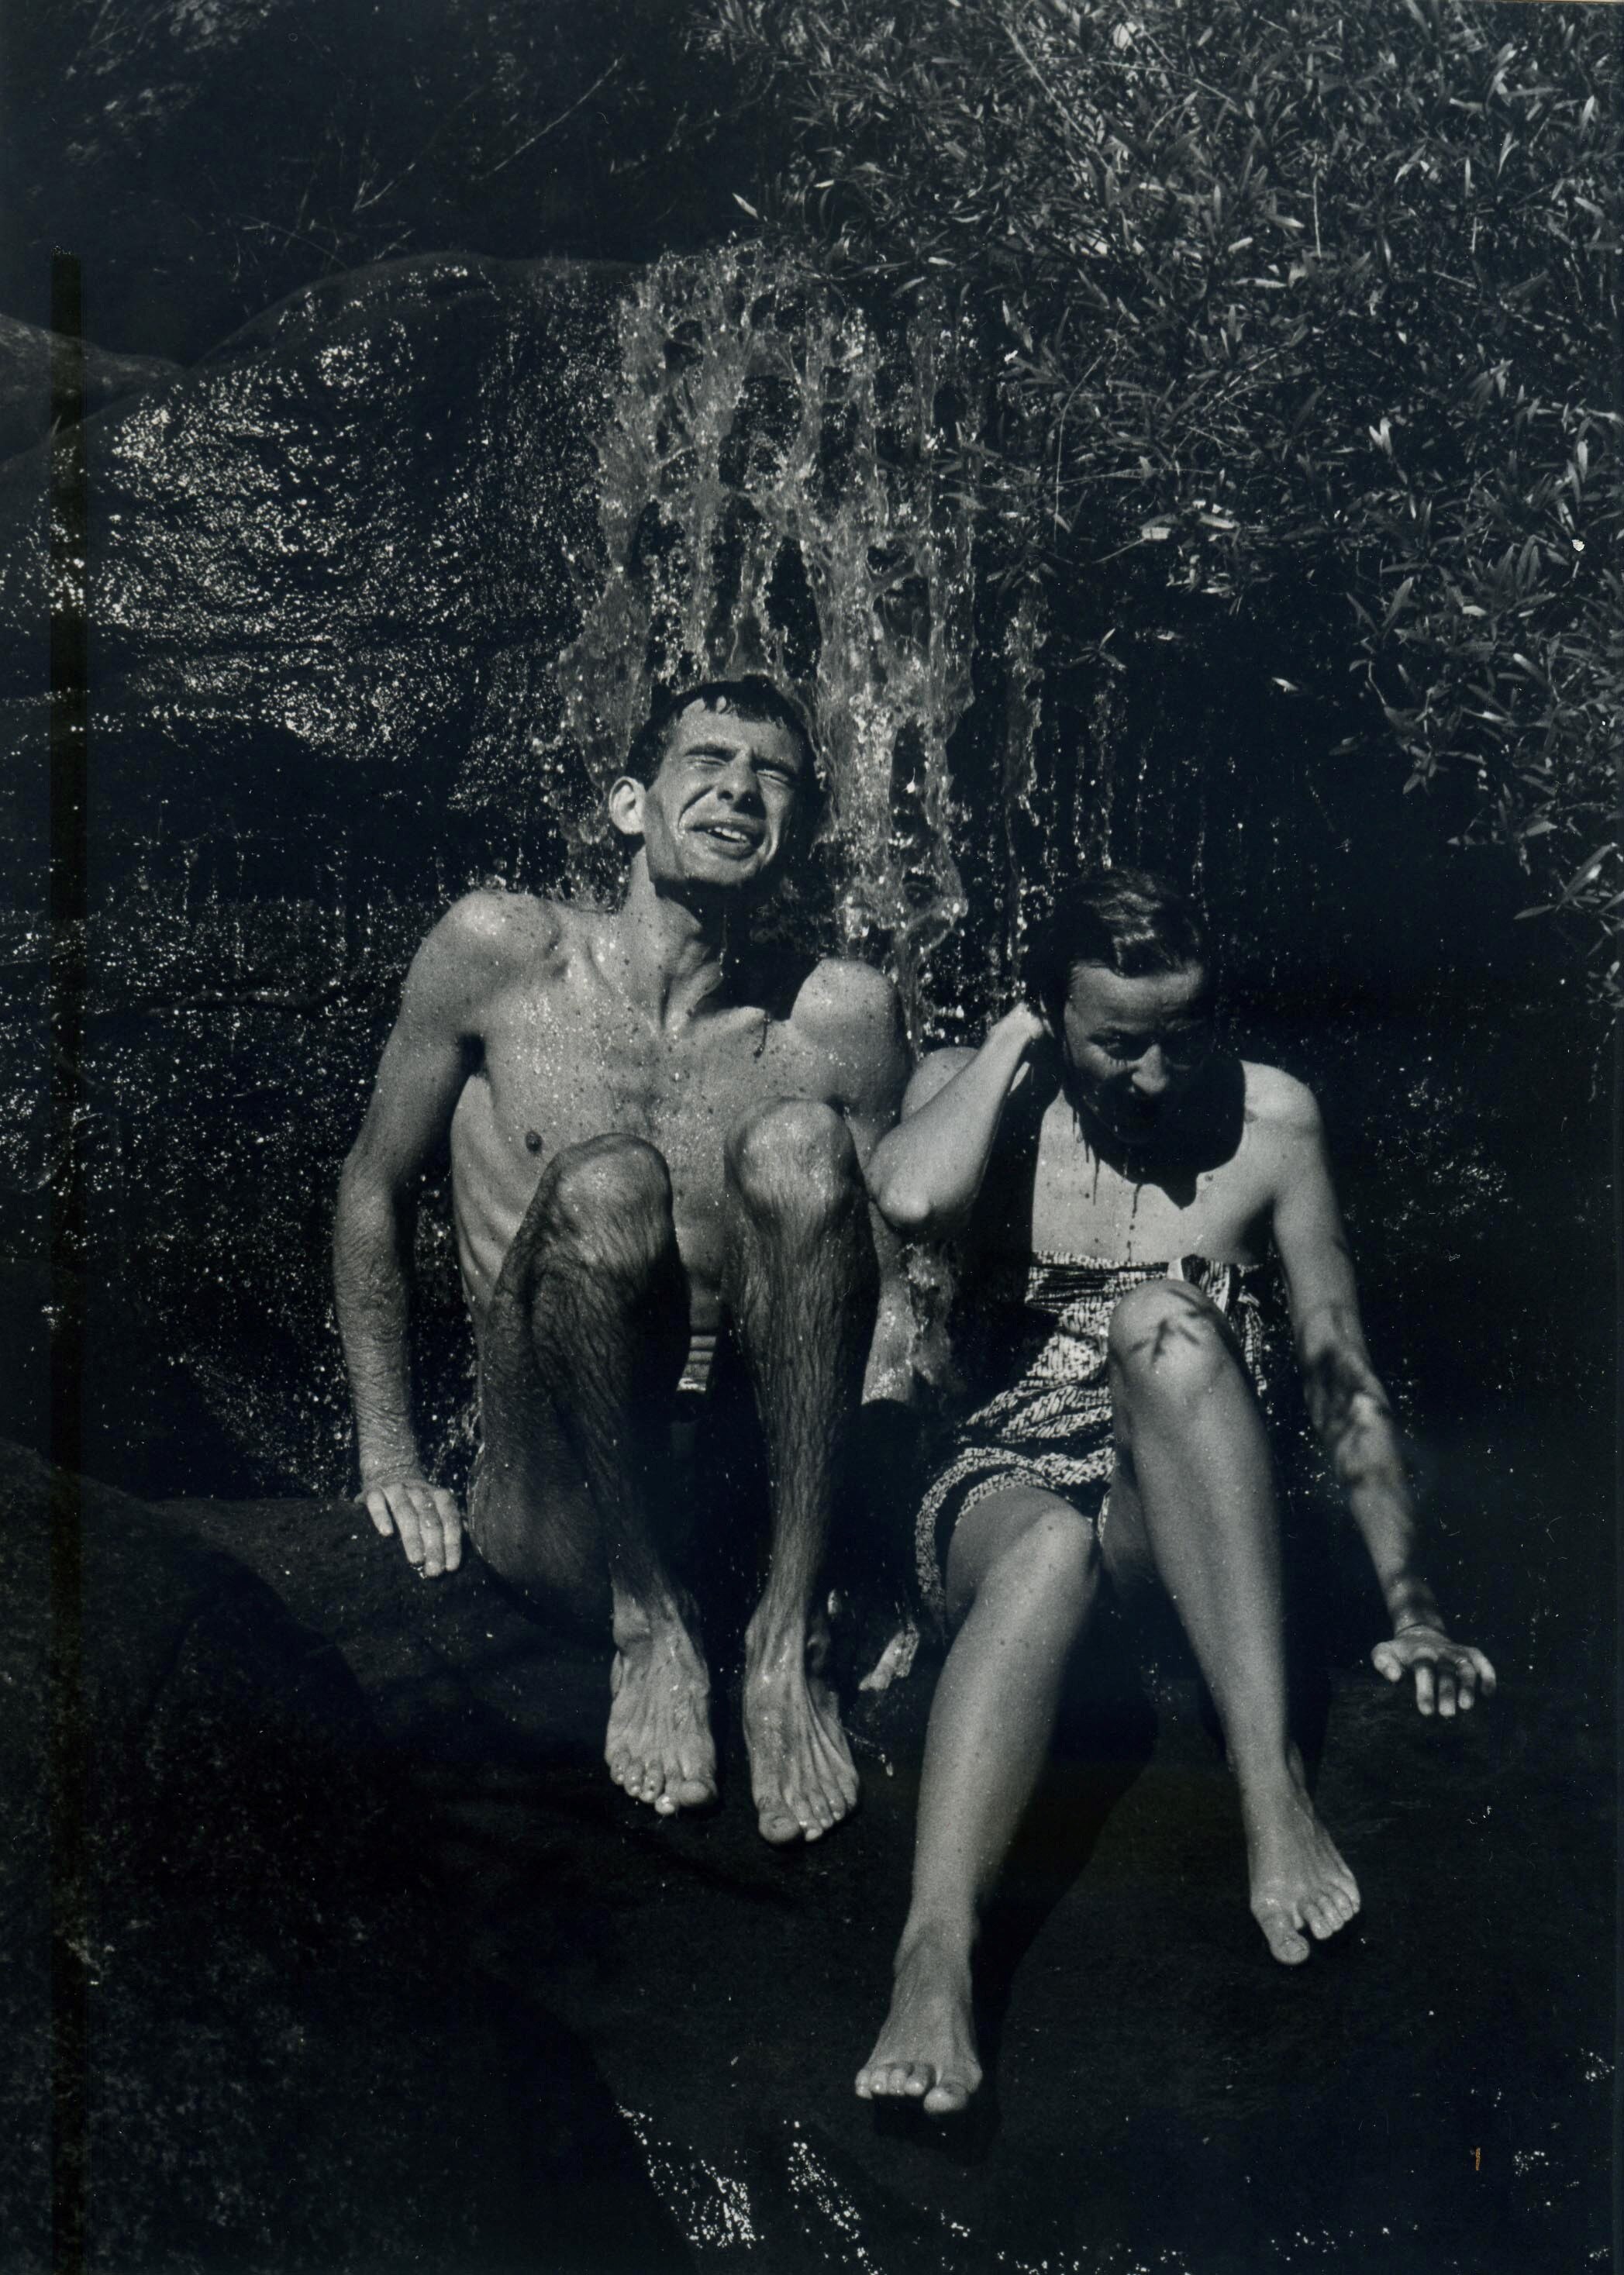 A black and white photo of a man and a women wearing swimmers sitting under a waterfall